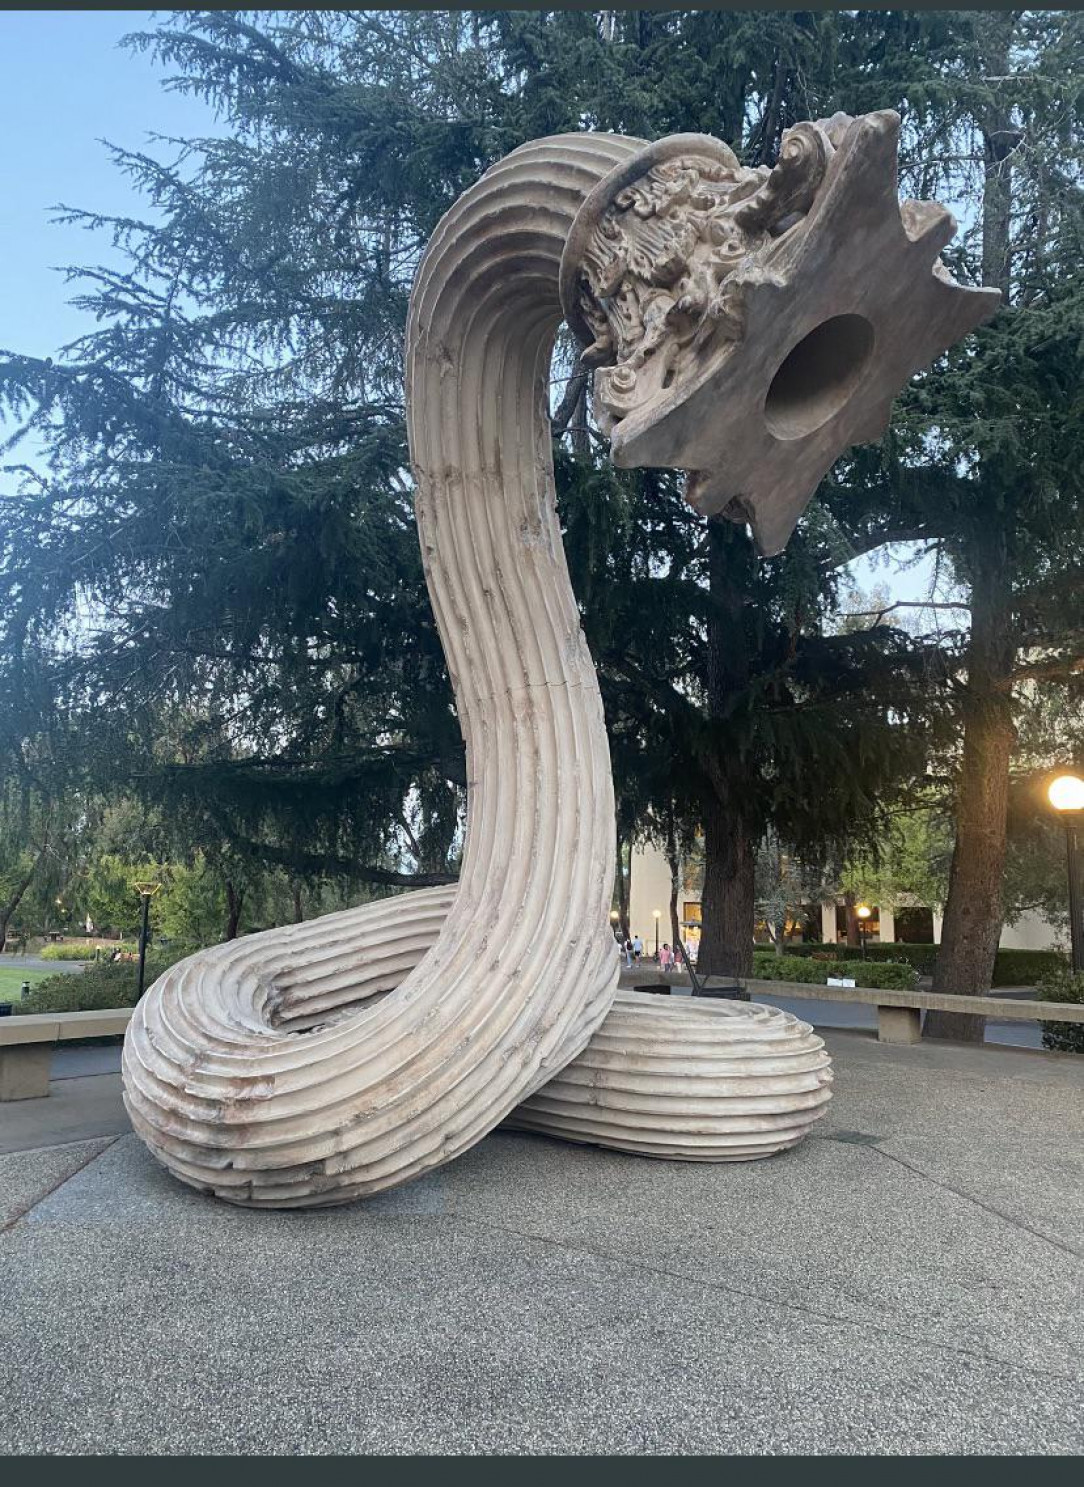 Stanford has a giant statue on campus of a Greco-Roman sandworm